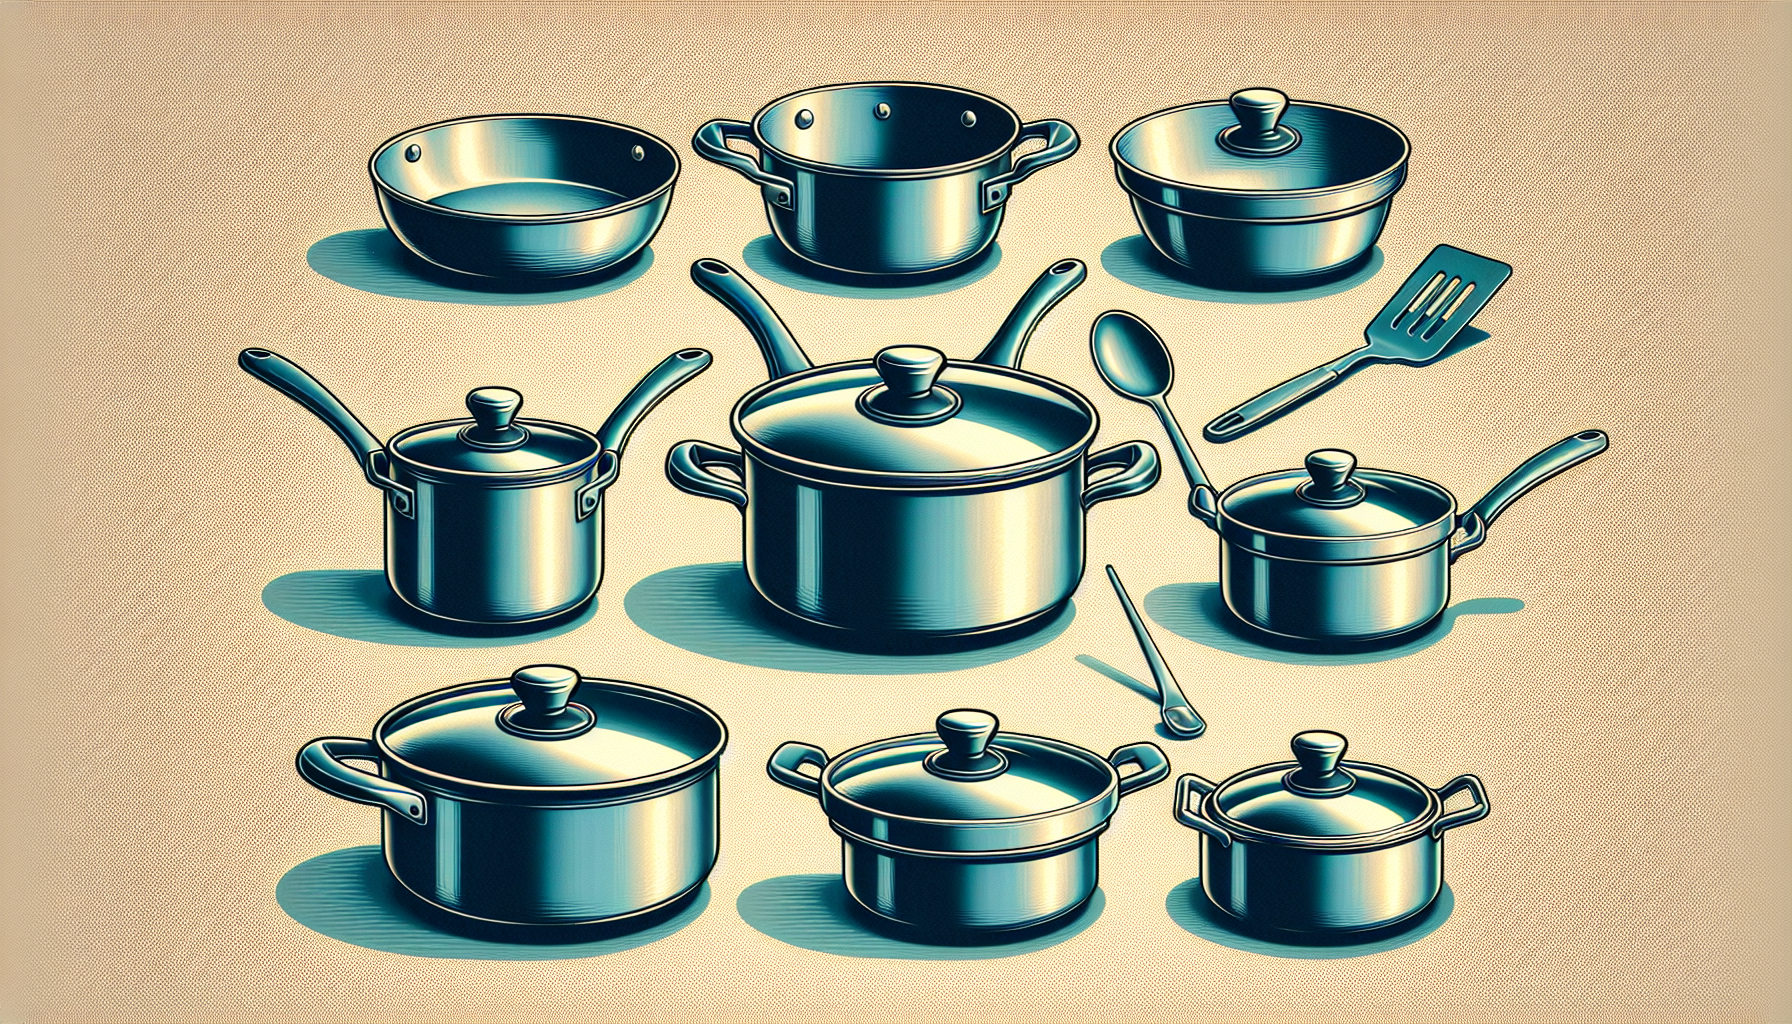 Are There Cookware Sets That Are Best Suited For Beginners?